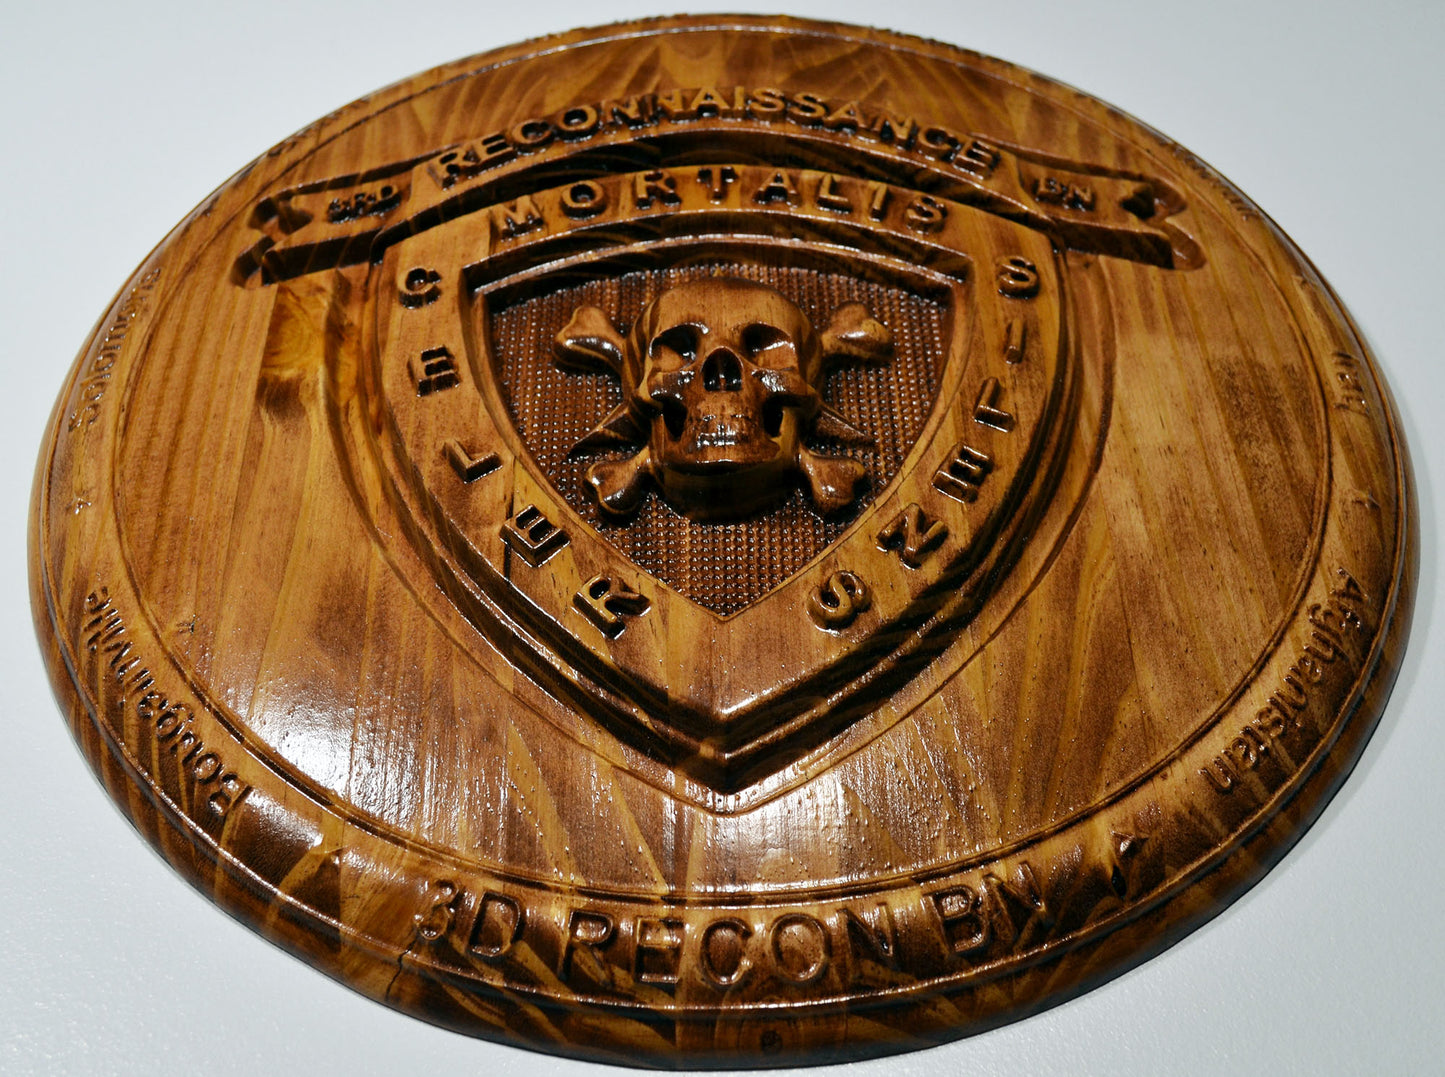 USMC 3rd Reconnaissance Battalion, Marine Corps Special Forces, stained 3d wood carving, military plaque